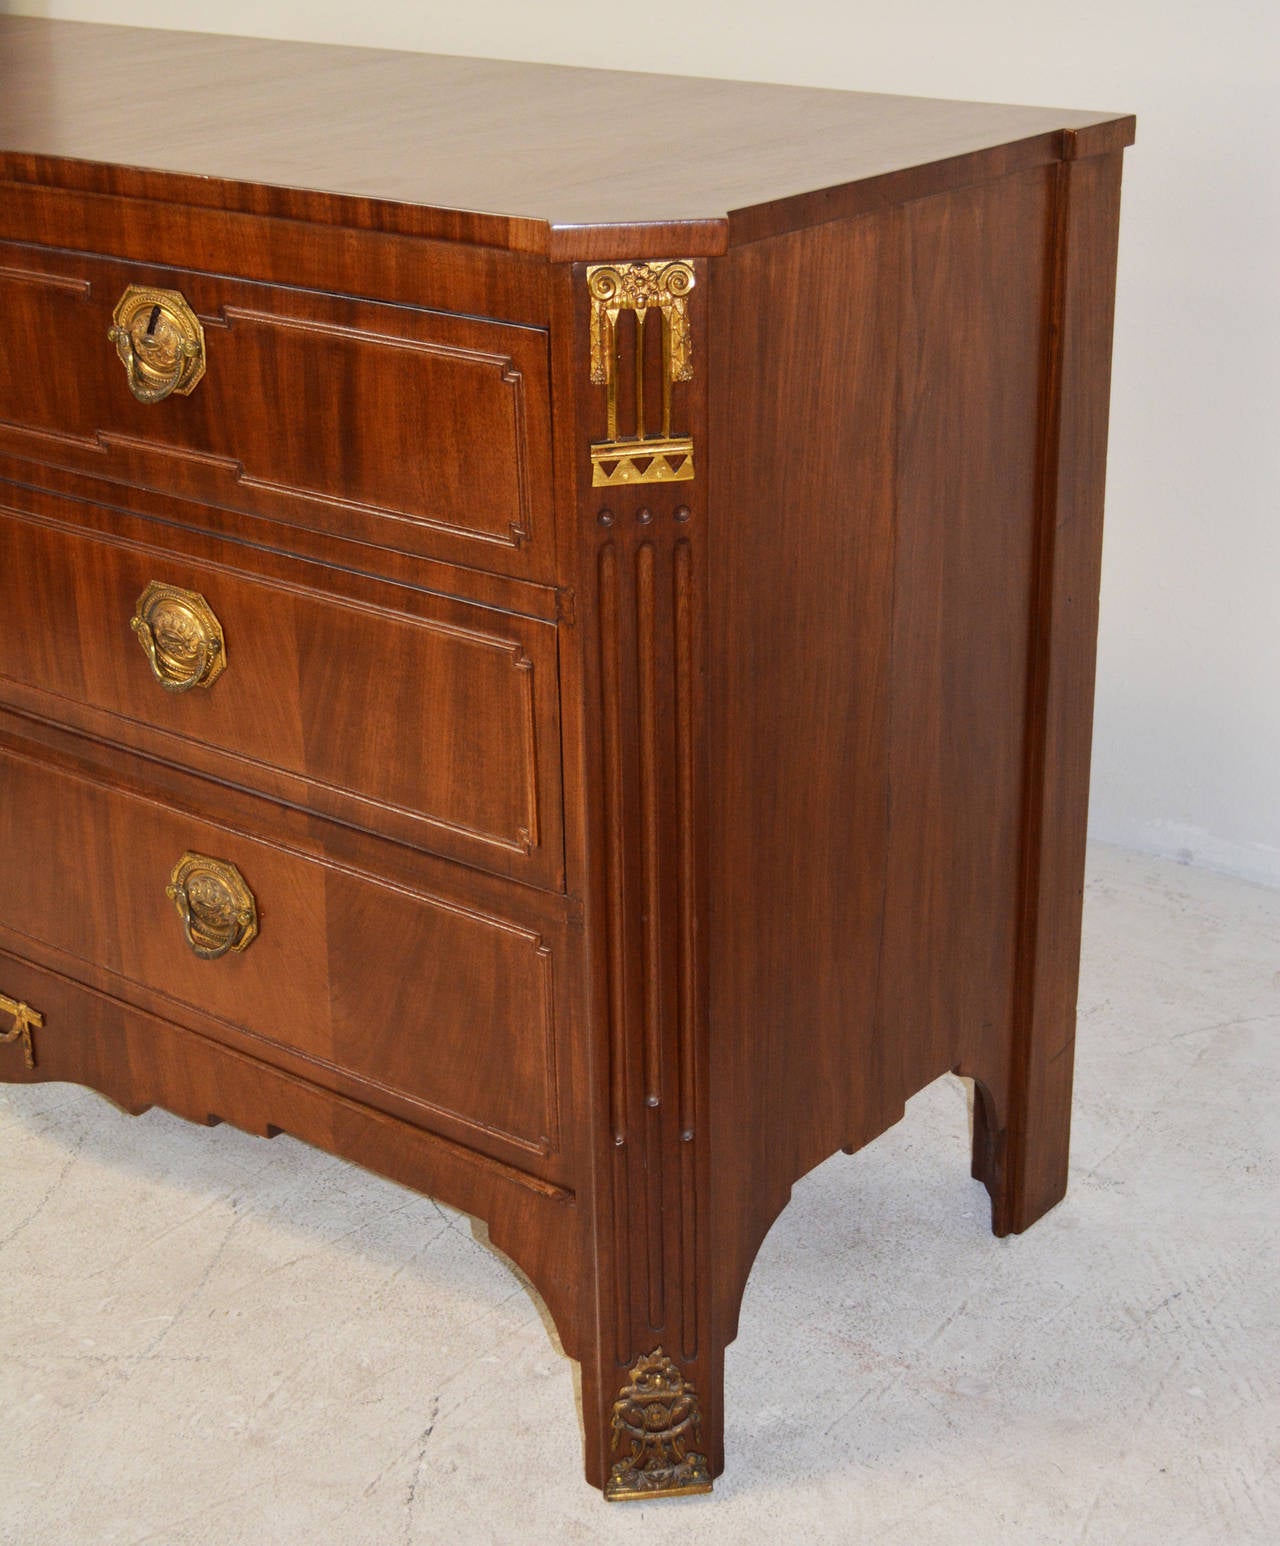 A good quality early 20th Century French Regency transitional style chest of large scale. A pair of drawers over two long drawers, with gilt bronze handles and escutcheons. Reeded canted corners with neo-classical mounts. In the style of Maison